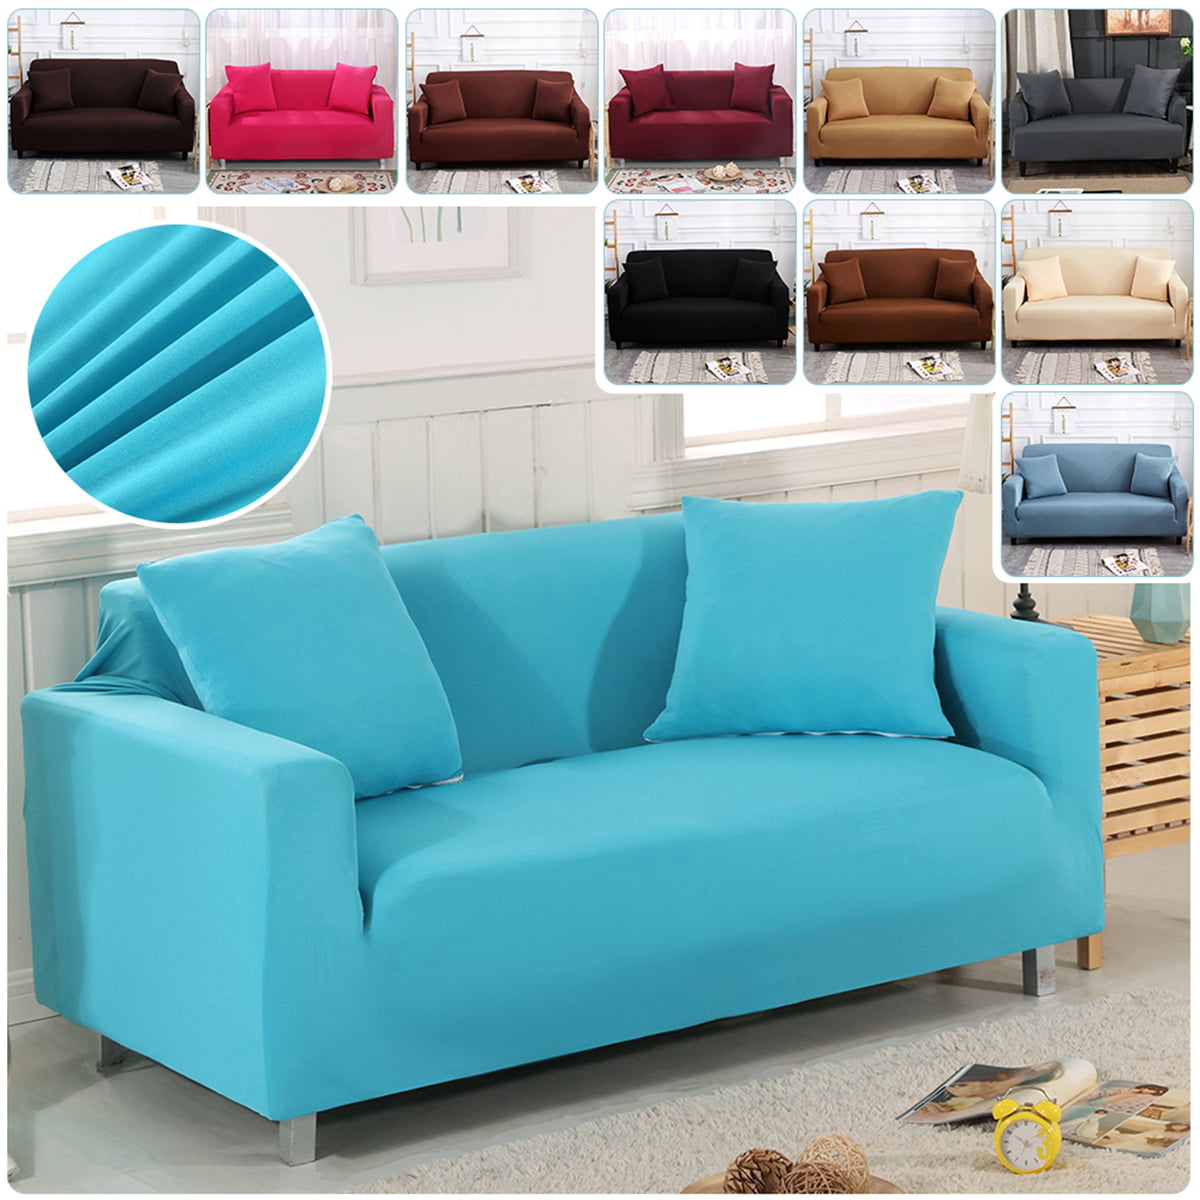 Details about   Sofa Cover Stretch Non-slip Living Room Chair L-shaped All-inclusive Armrest 